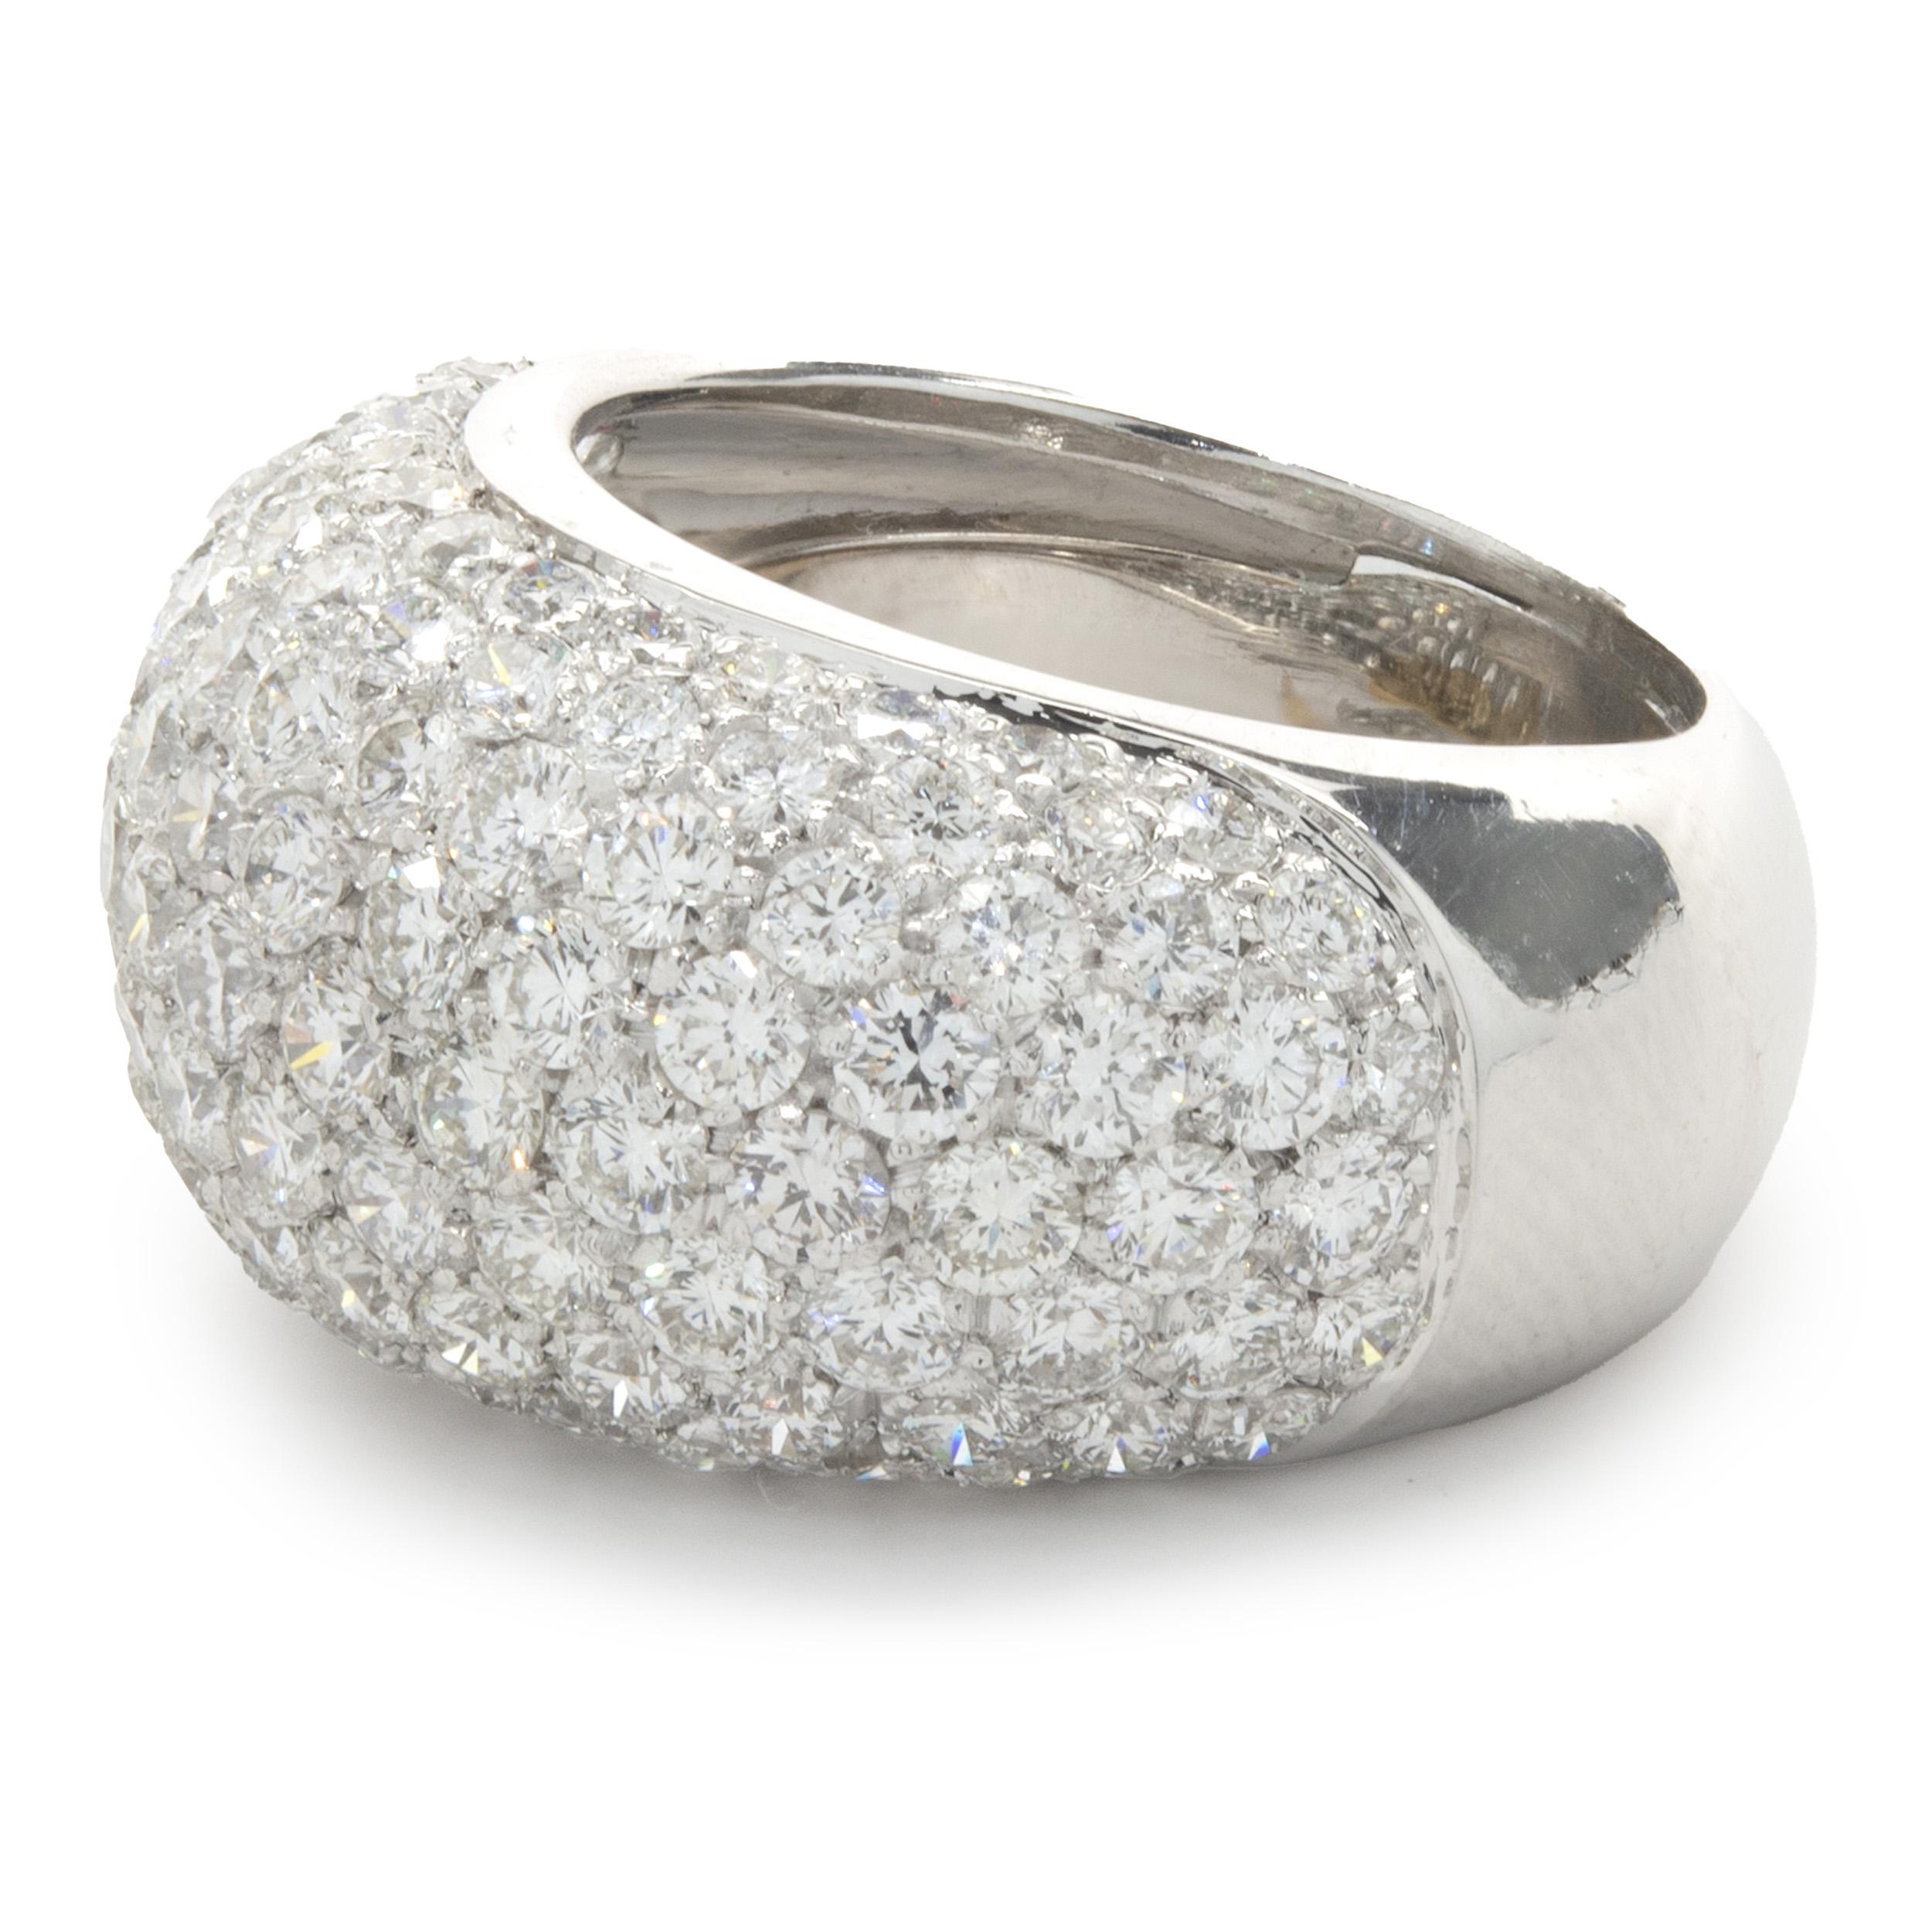 18 White Gold Pave Diamond Dome Ring In Excellent Condition For Sale In Scottsdale, AZ